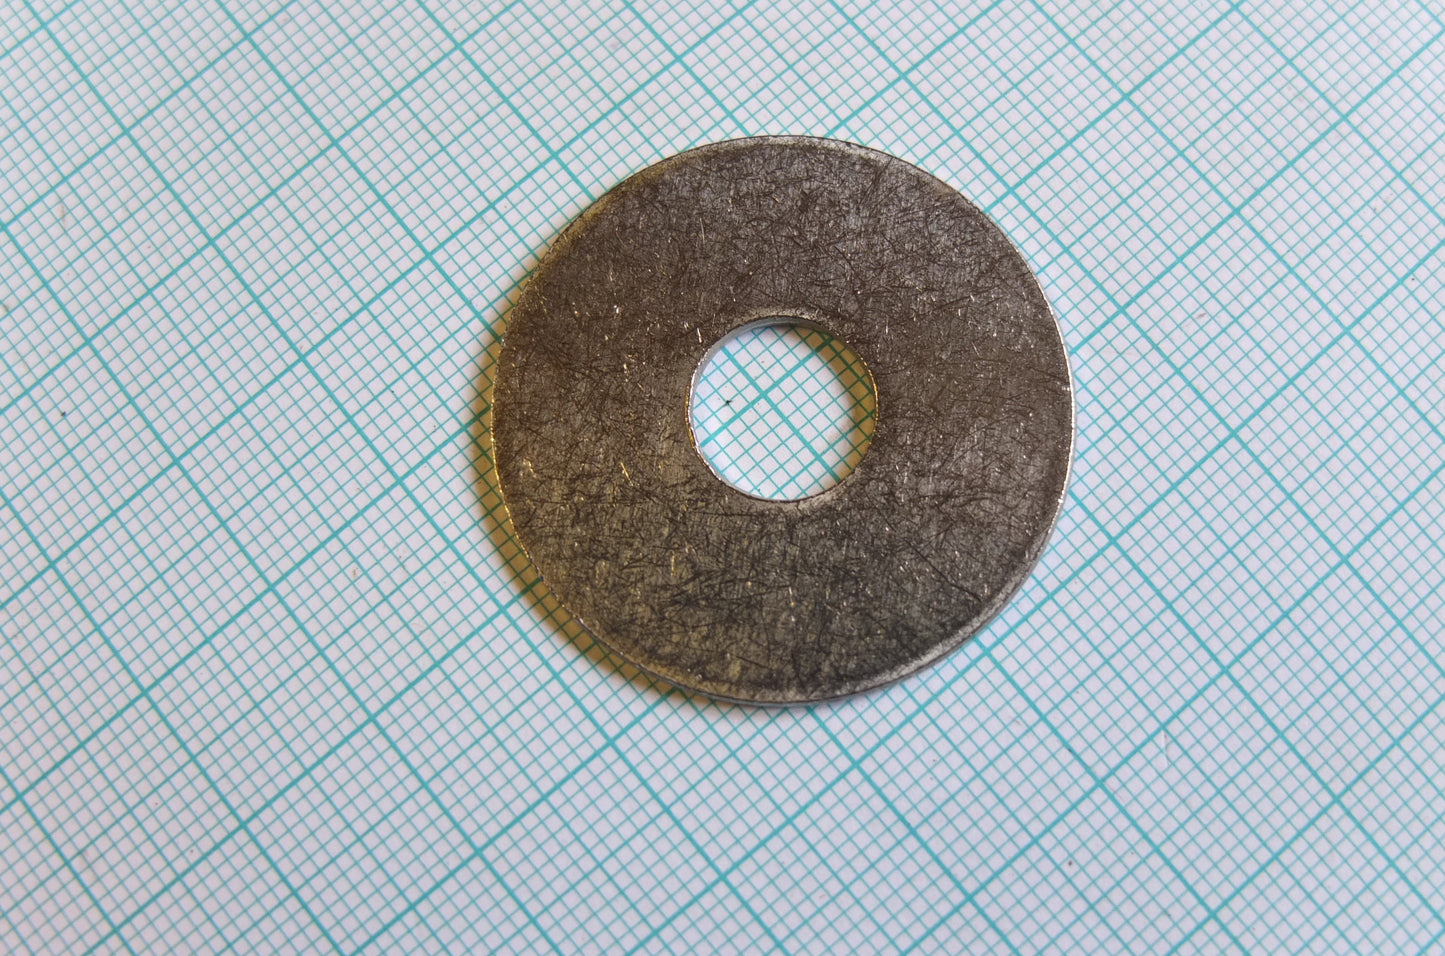 P4/013 Tank rubber support washer